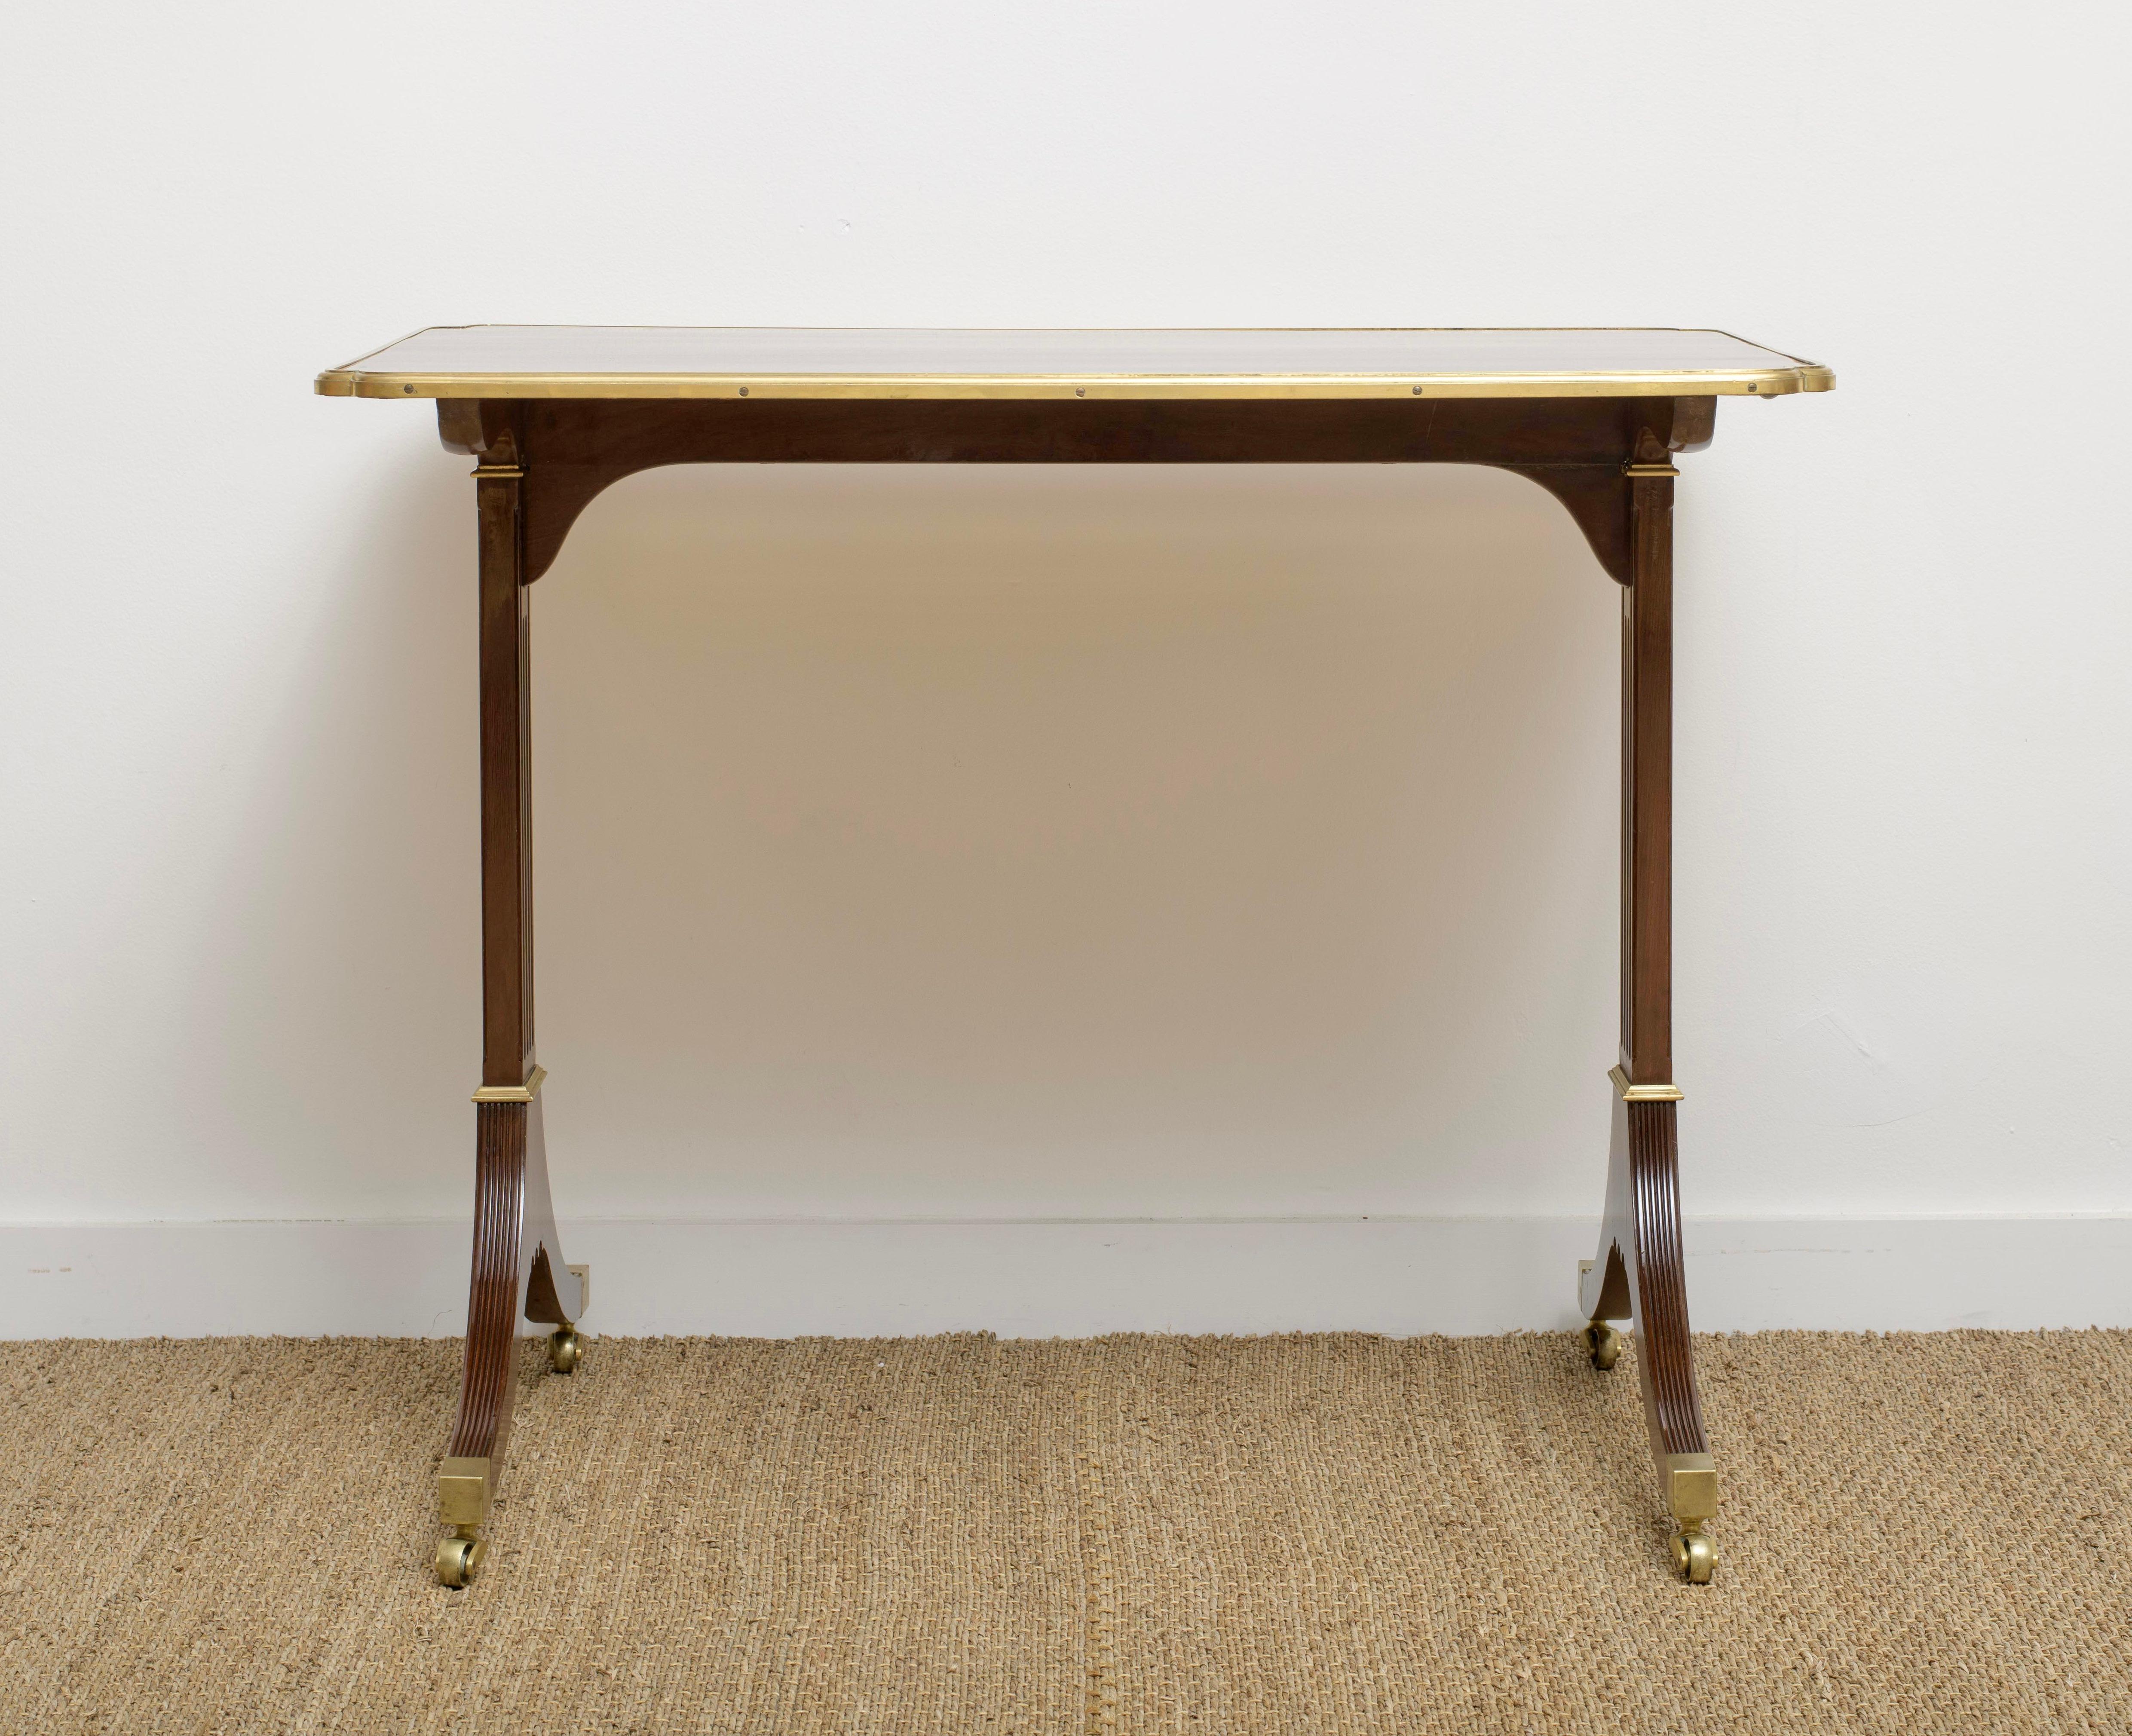 A Important Louis XVI period gilt-metal mounted mahogany occasional table, by Etienne Avril,
last quarter 18th century
The shaped rectangular top with rounded corners and moulded edge, above
channelled trestle supports terminating in splayed legs